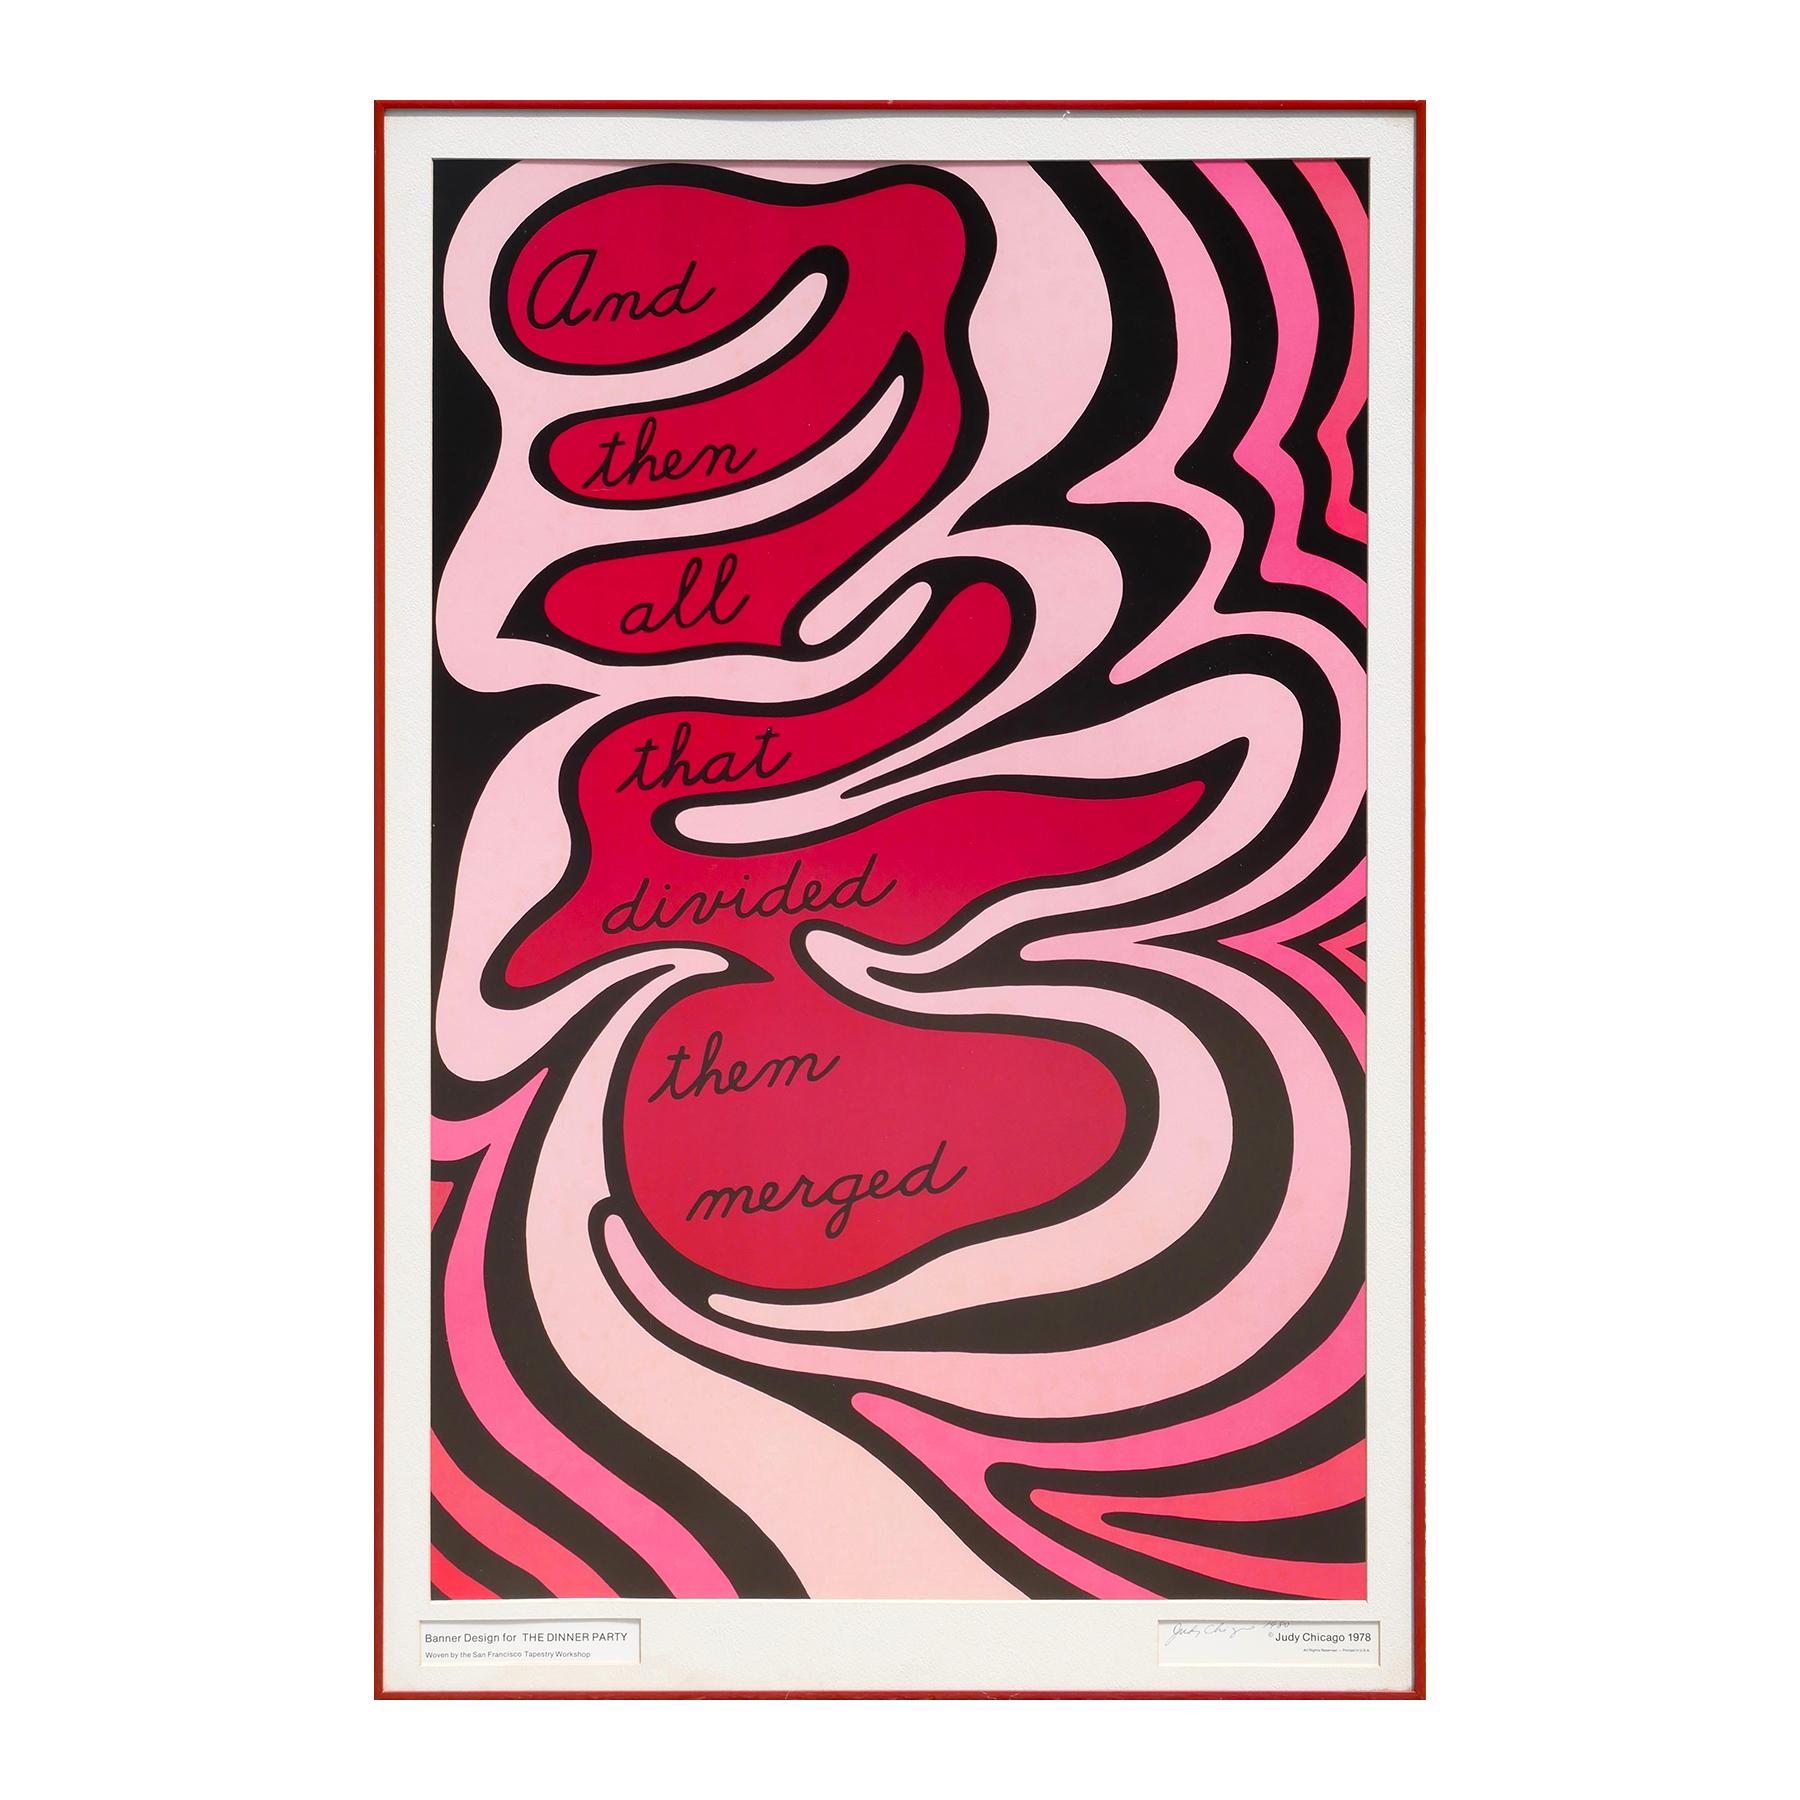 “And then all that divided them merged” Banner Design for THE DINNER PARTY - Print by Judy Chicago